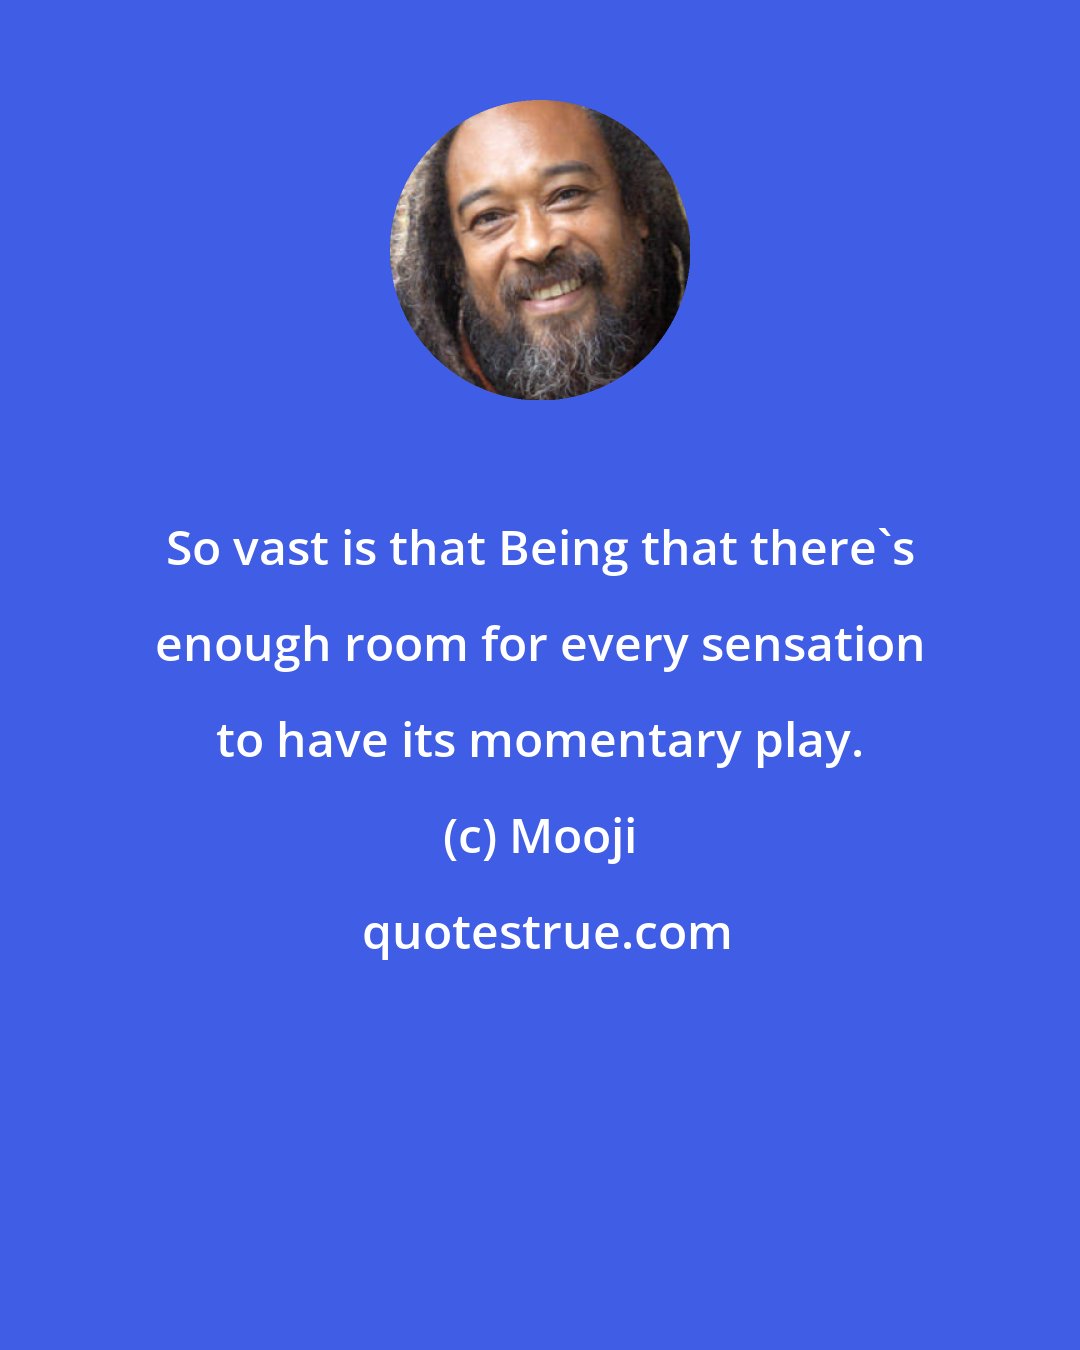 Mooji: So vast is that Being that there's enough room for every sensation to have its momentary play.